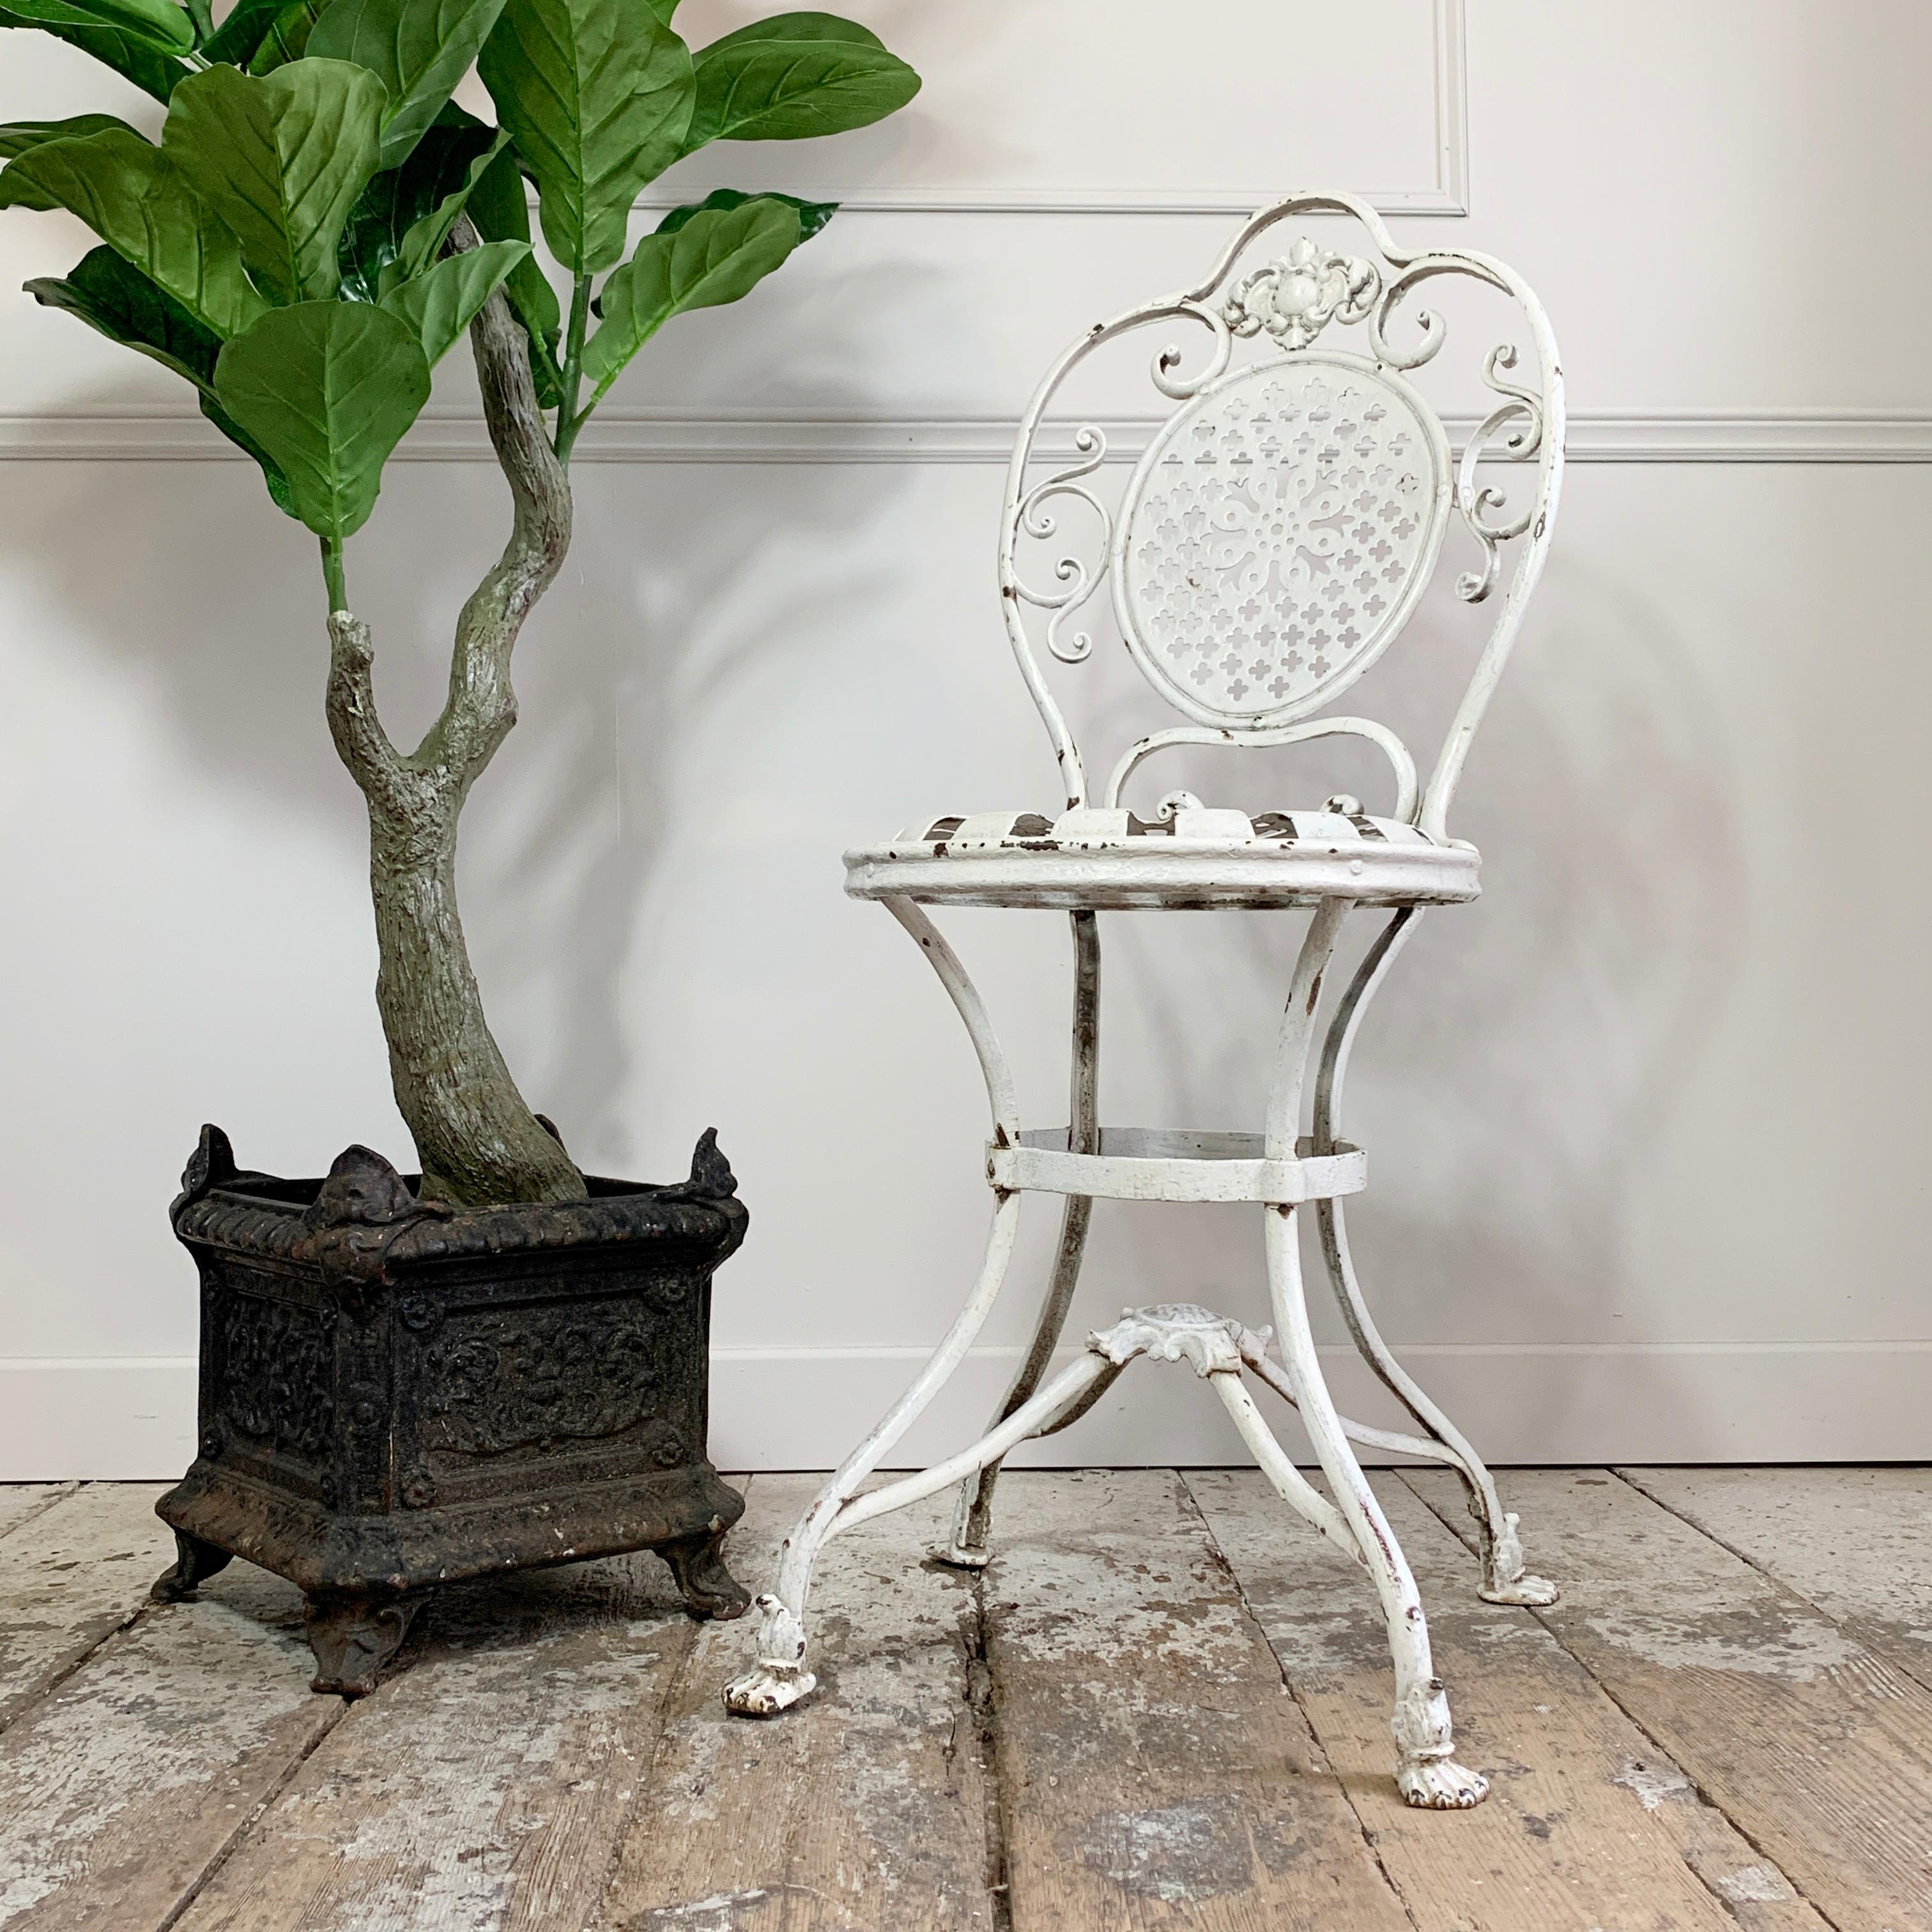 An absolutely stunning Arras Orangery chair, the highly decorative and detailed piece is in exceptional antique condition. This is the early original Arras model, bearing the Lions Paw feet, so dates to circa 1880. The elegant decorative, raise seat